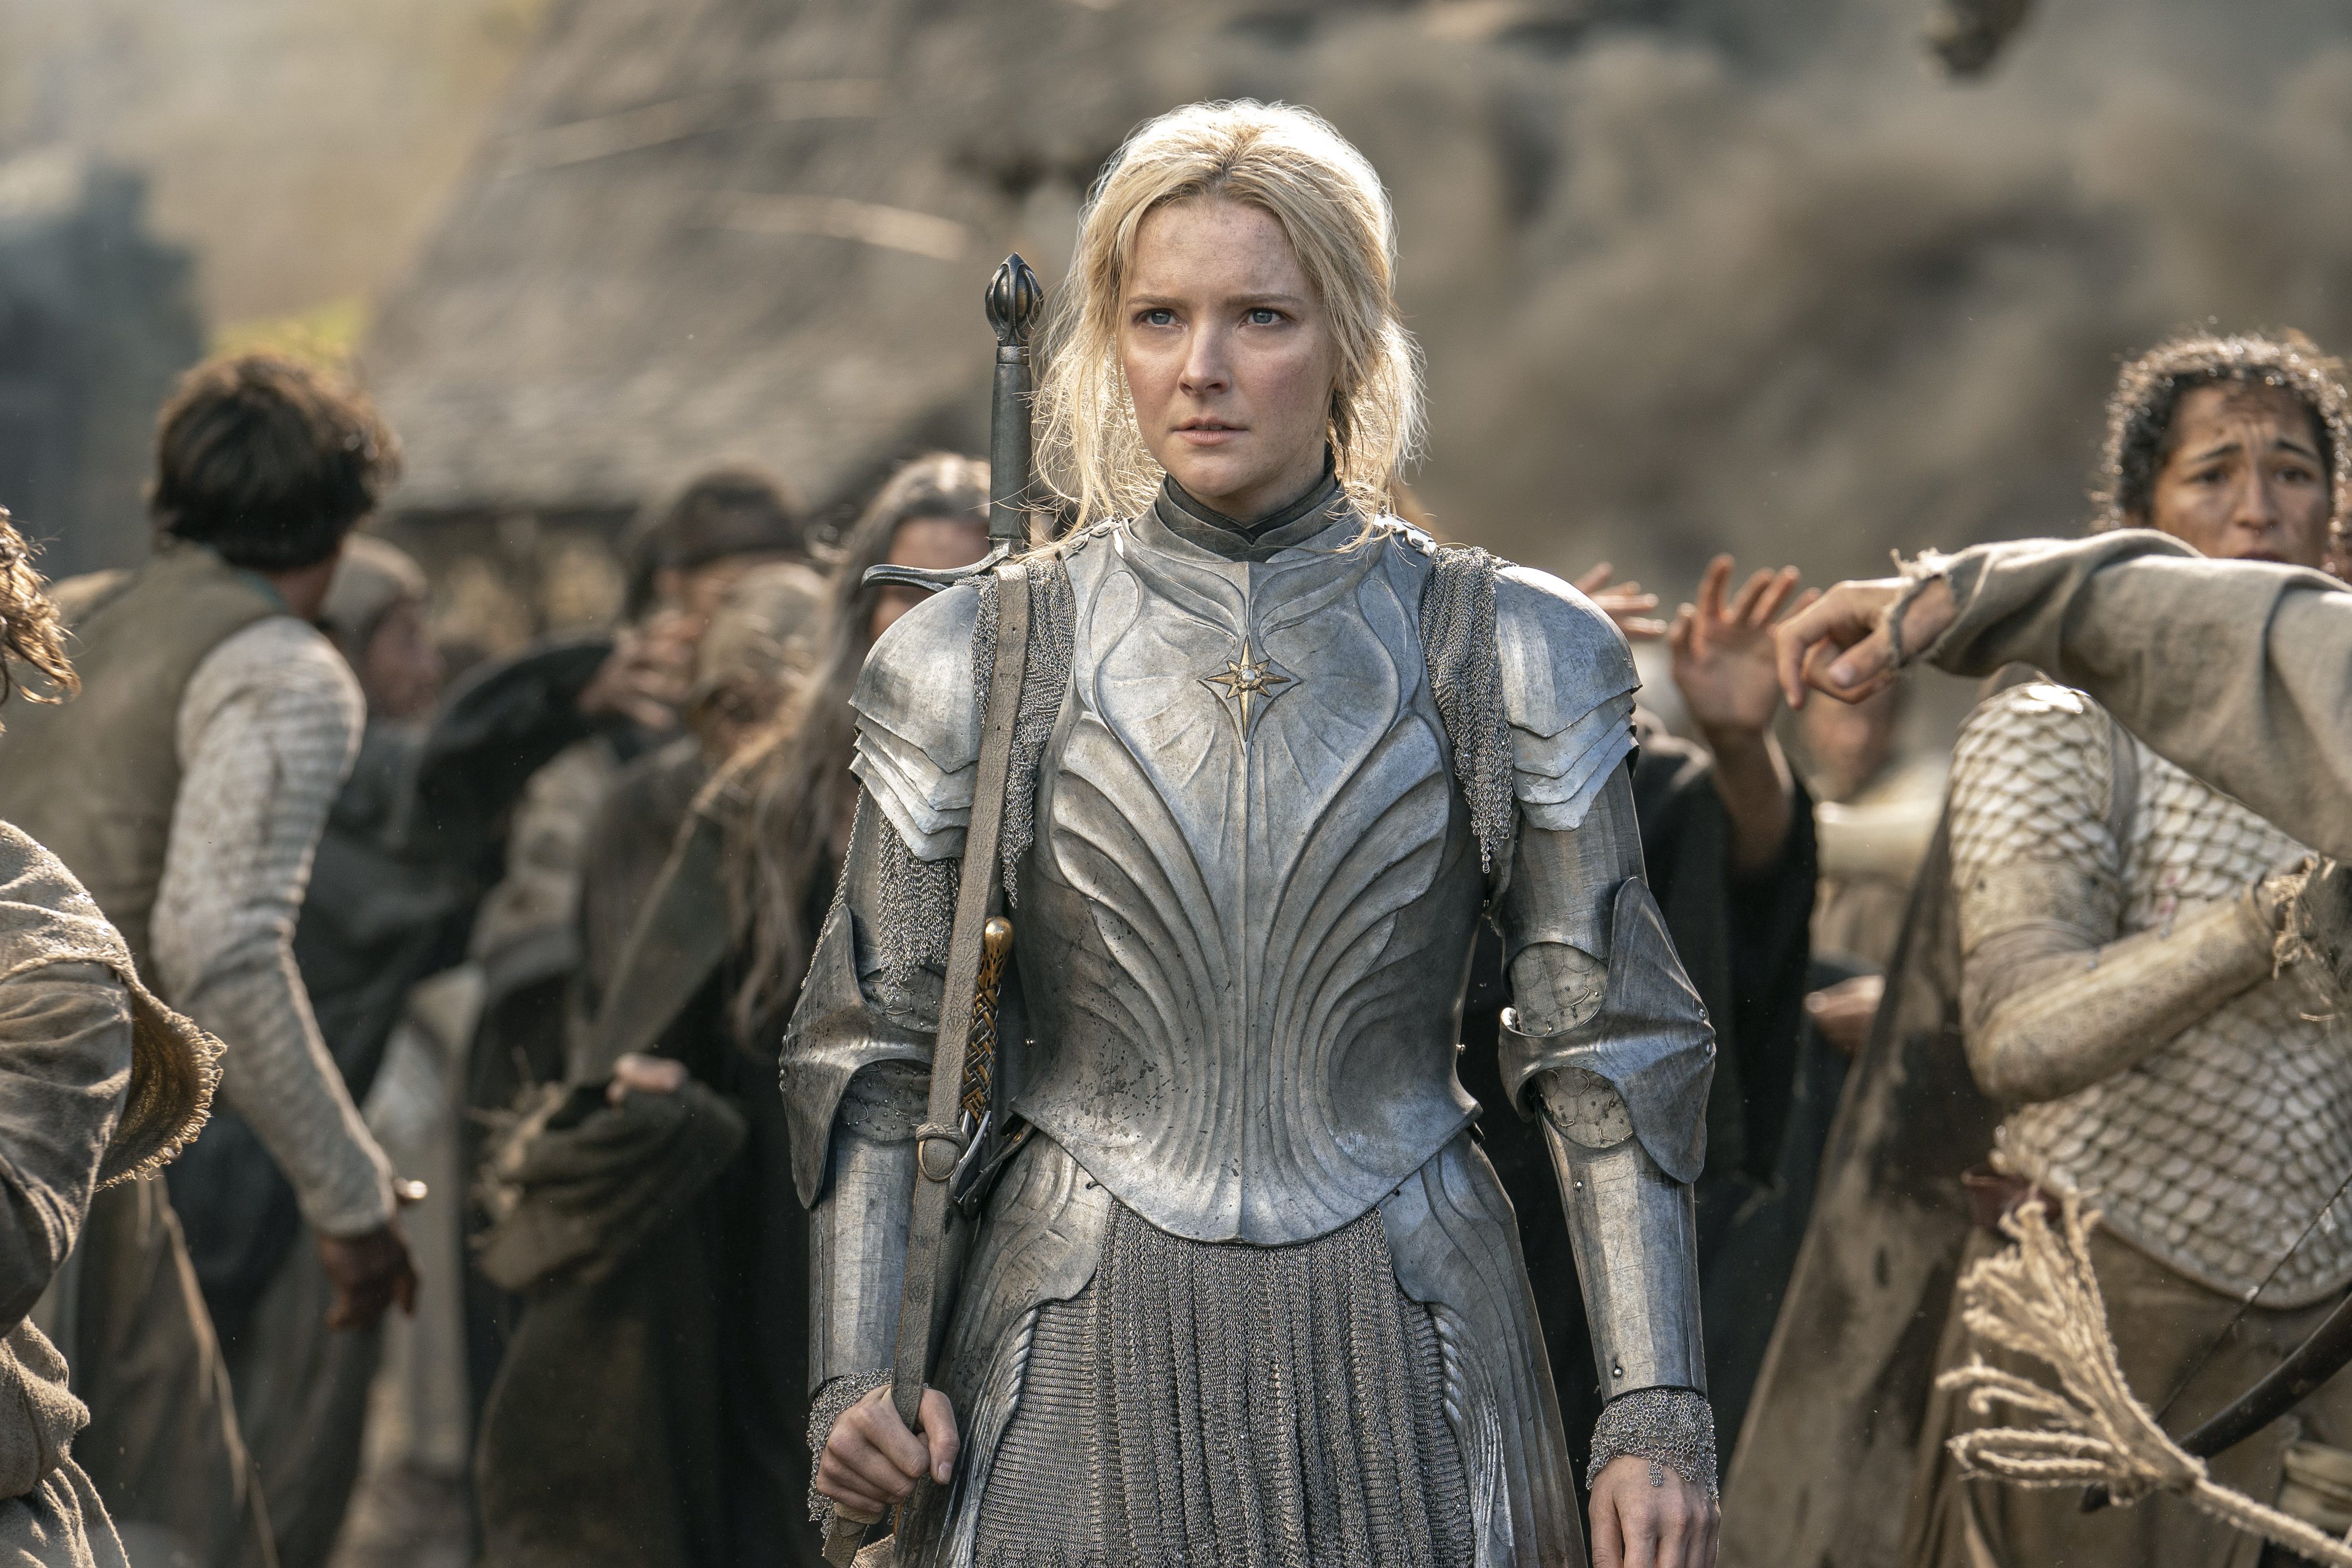 People 4096x2731 Morfydd Clark Galadriel women actress armor The Lord of the Rings sword blonde long hair group of people Swedish women war